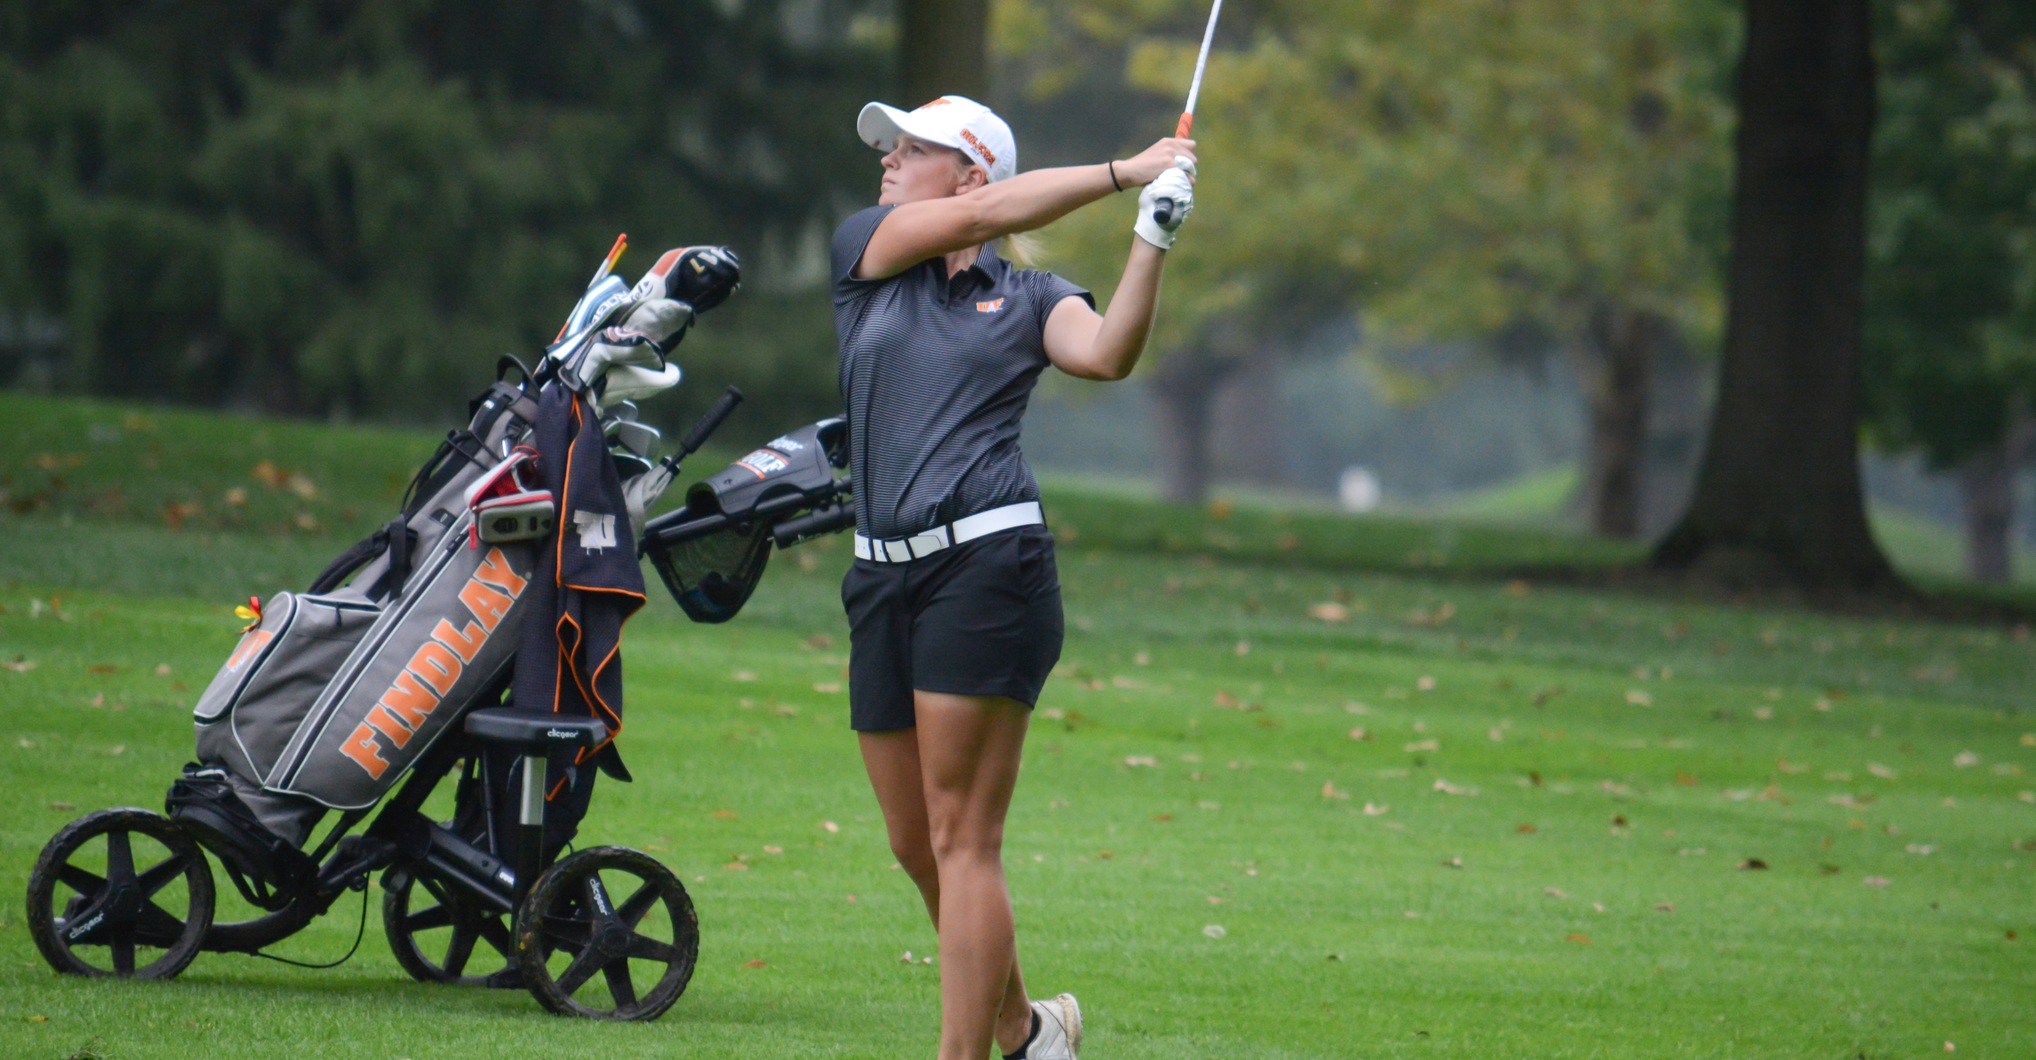 Findlay in Second Through One Round at William Beall Fall Invite